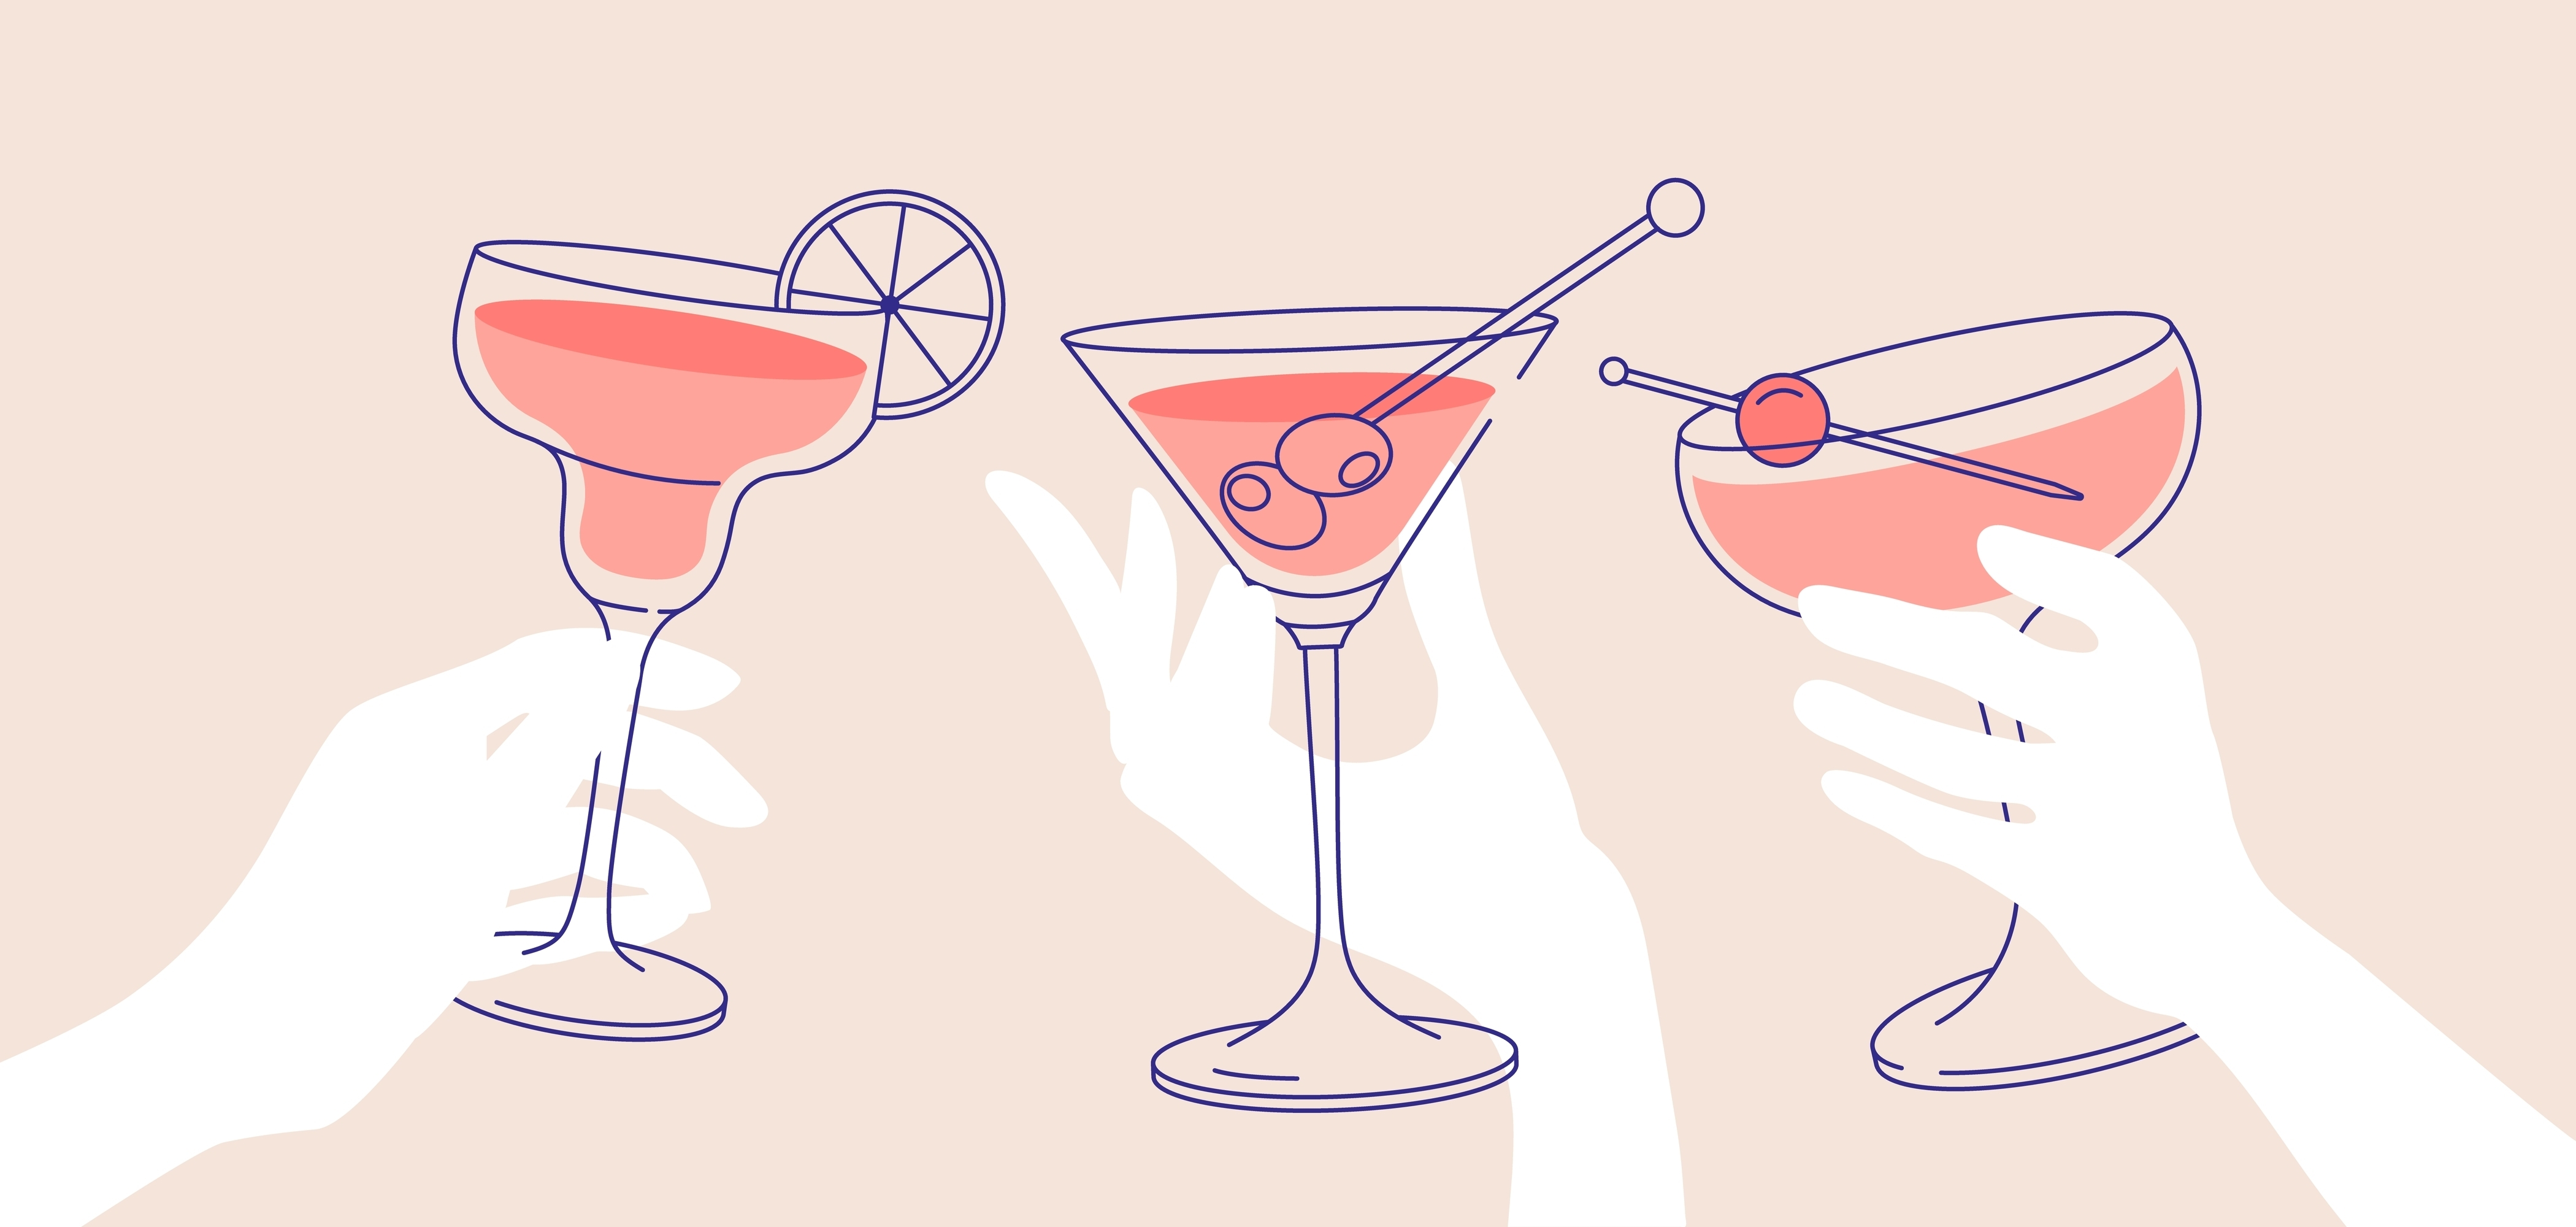 Women’s hands holding glasses of margaritas and martini